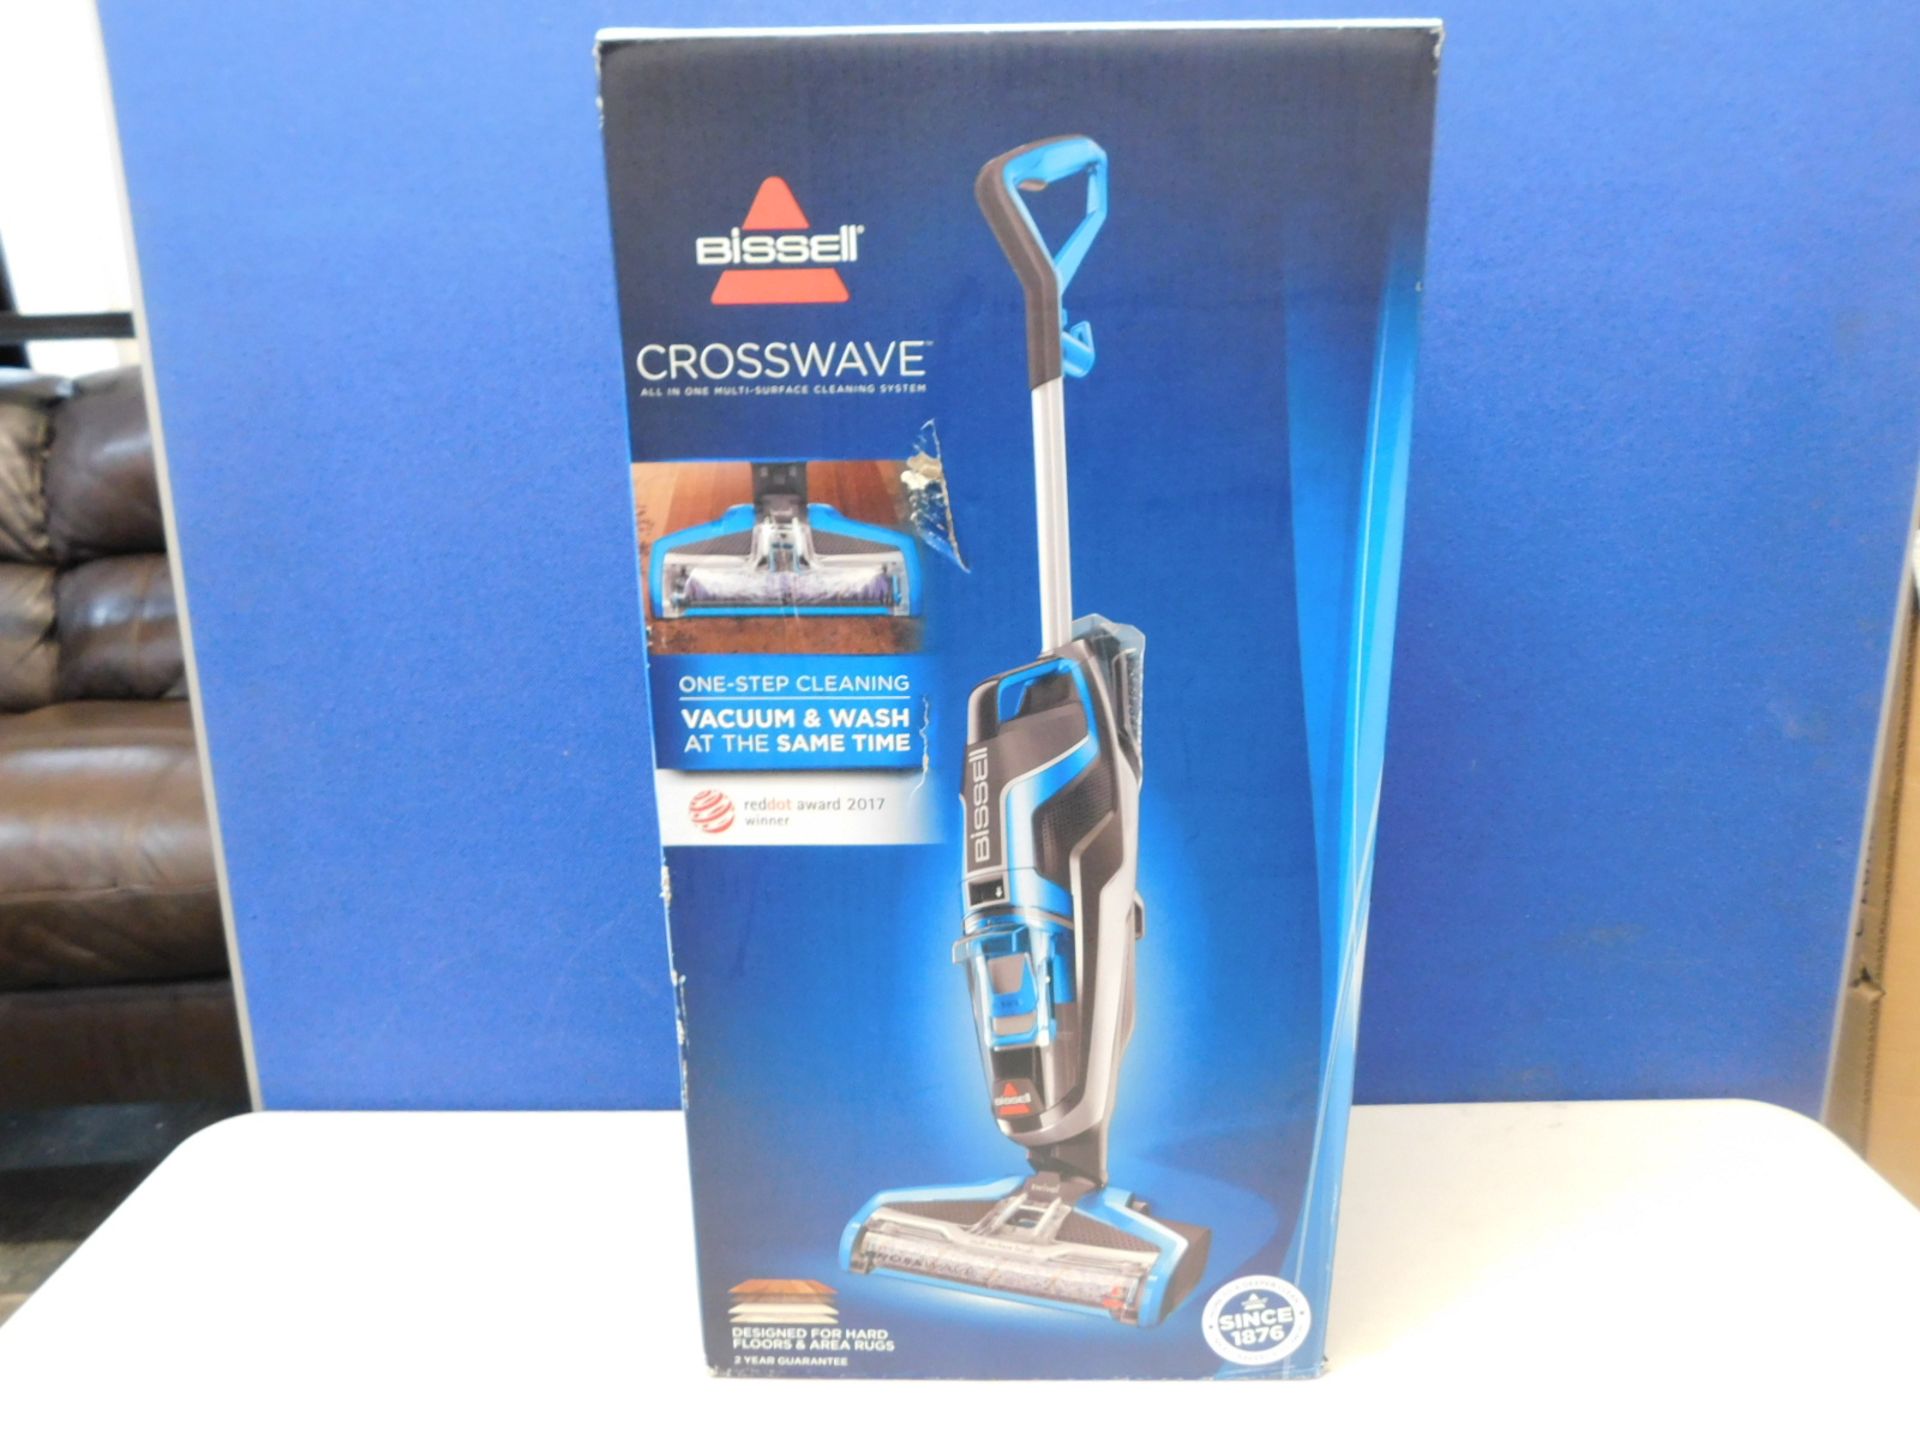 1 BOXED BISSELL CROSSWAVE ALL IN ONE MULTI-SURFACE CLEANING SYSTEM RRP Â£249.99